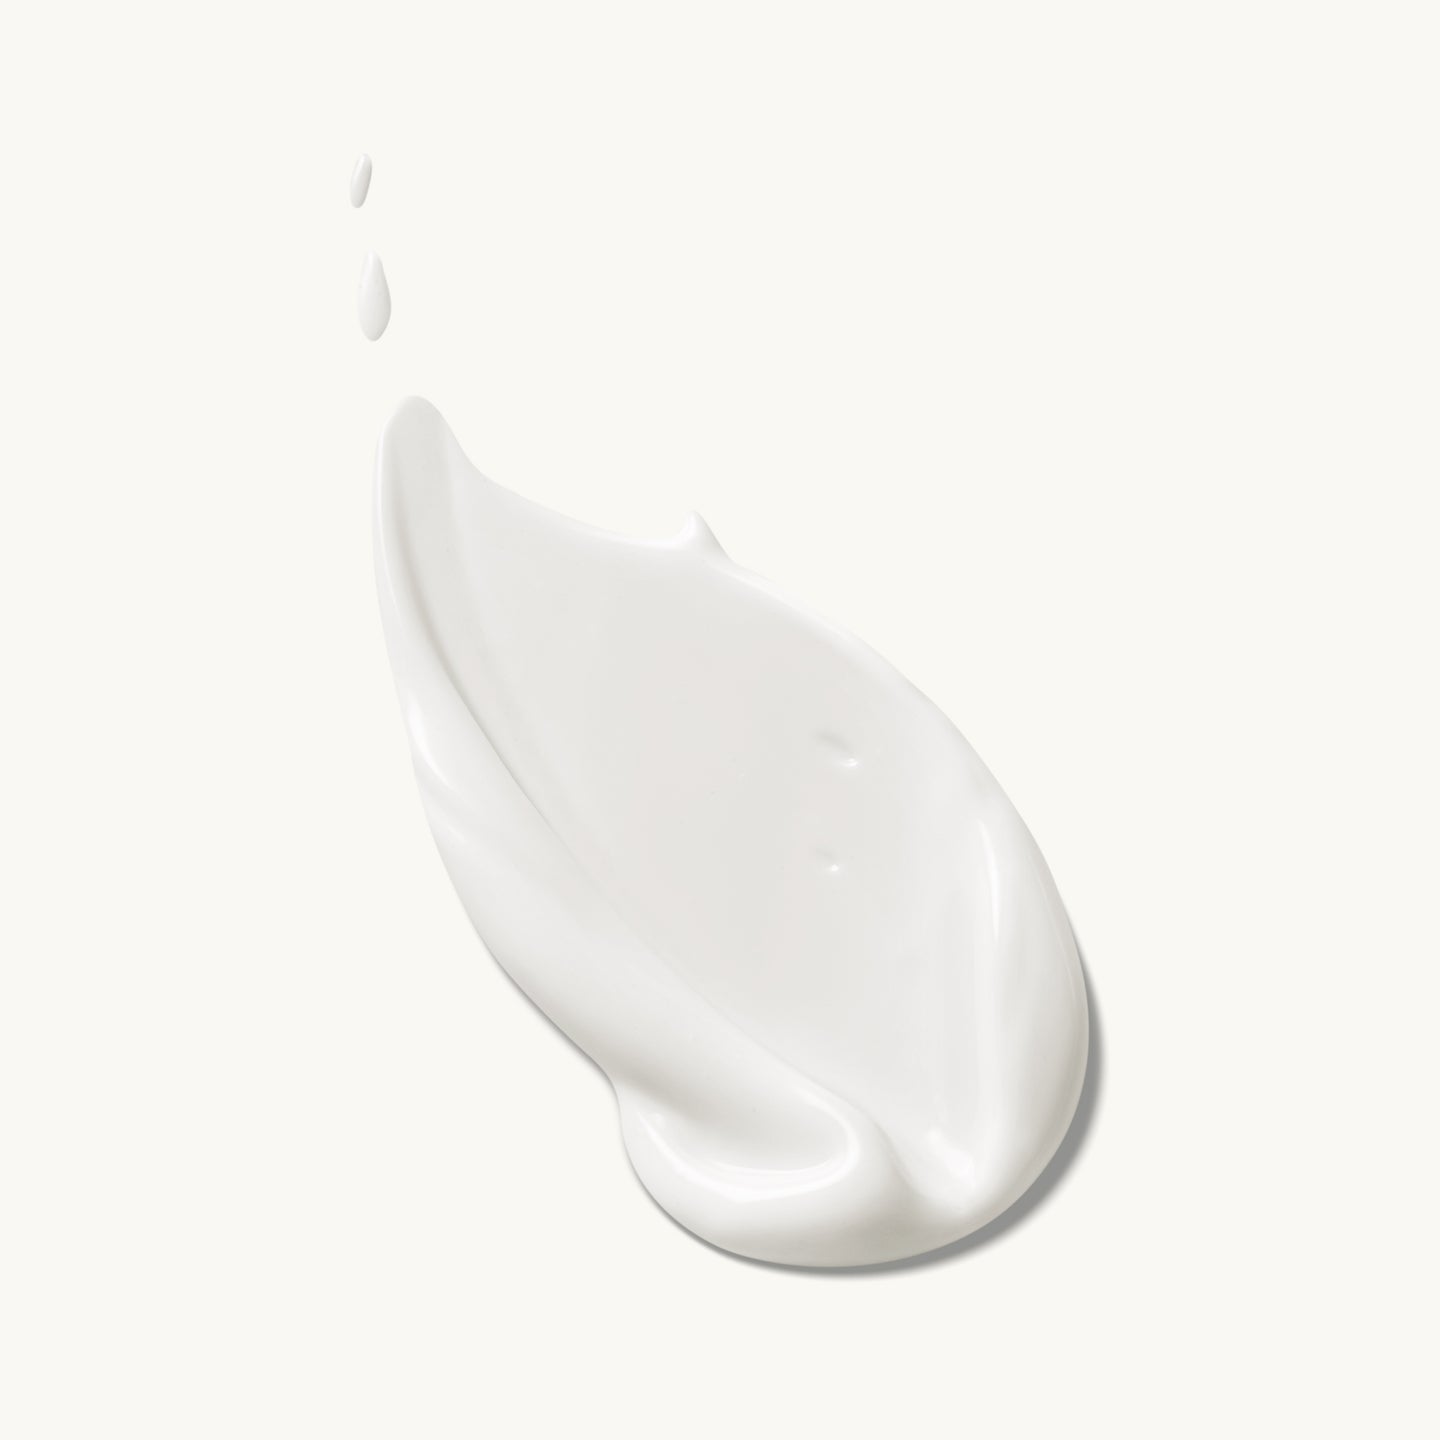 MATTER OF FACT SKINCARE MINIMALIST HYDRATING MOISTURIZER product texture on a beige background